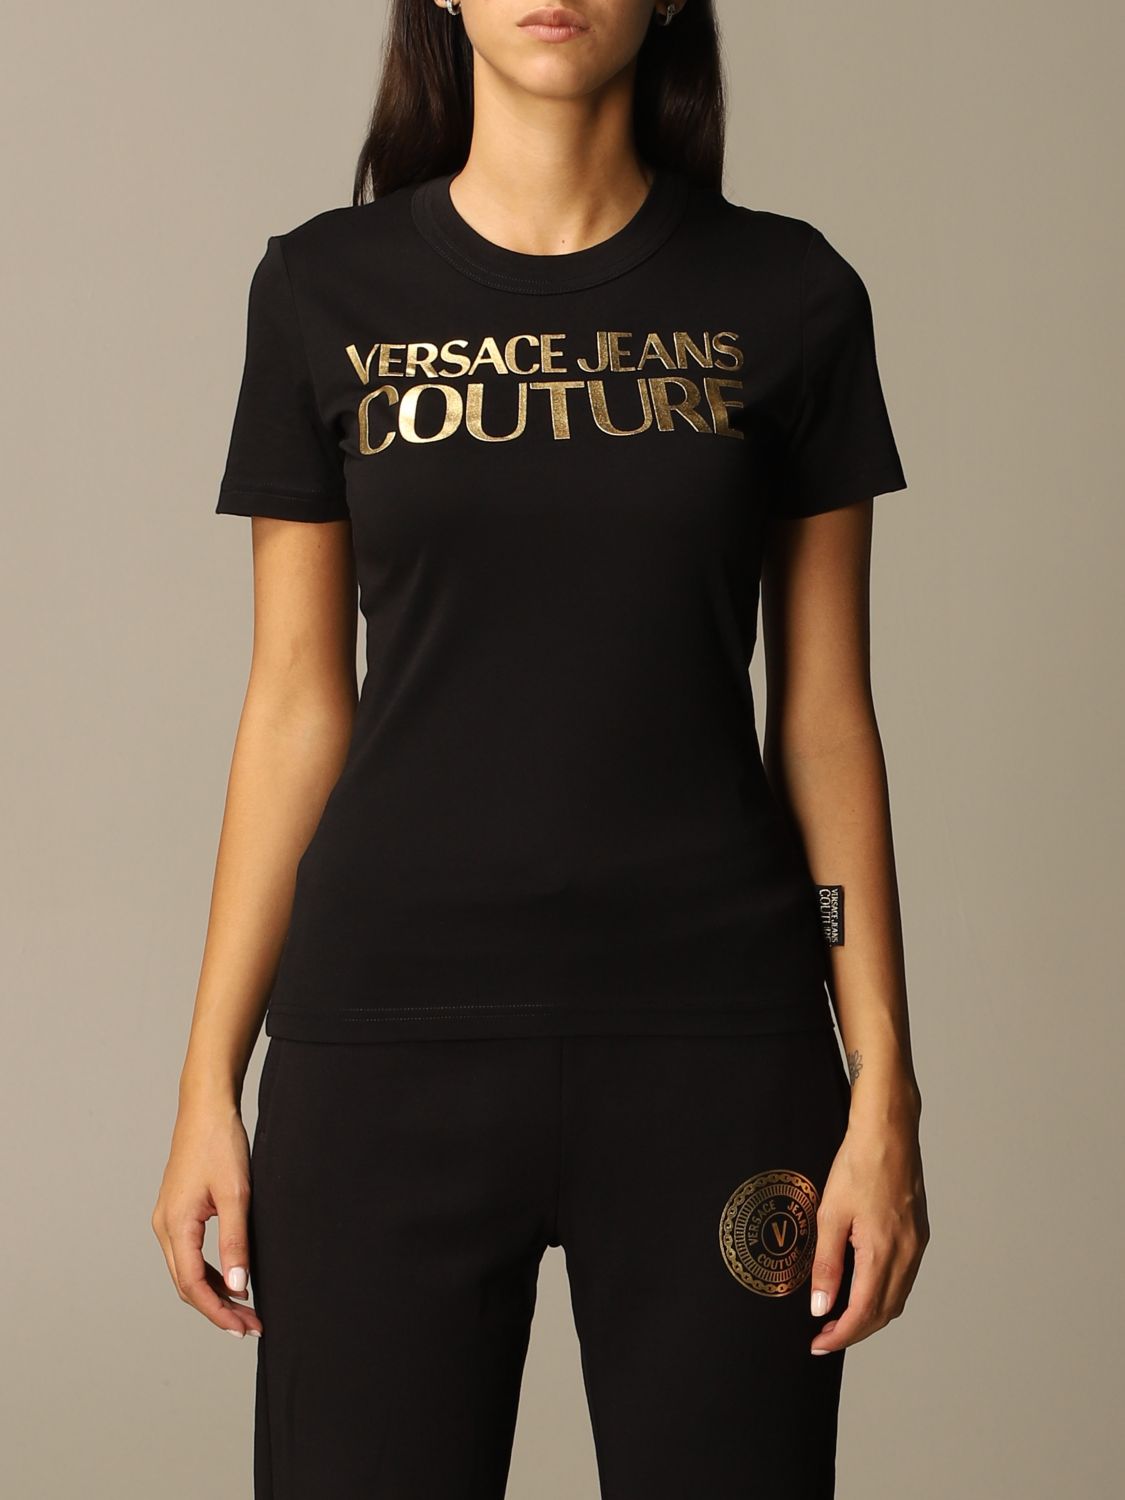 versace jeans couture women